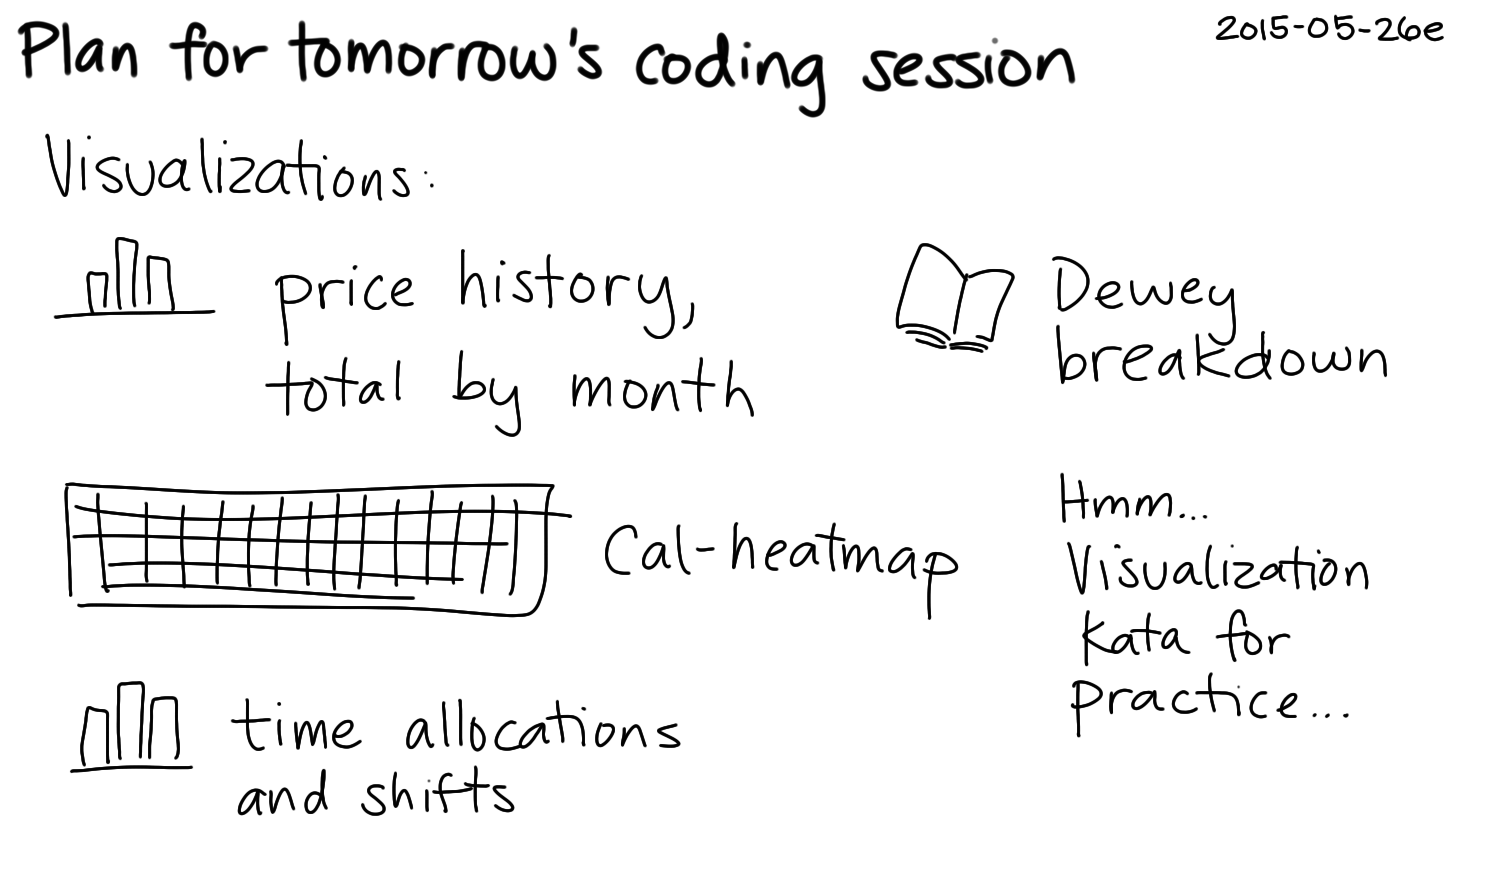 2015-05-26e Plan for tomorrow's coding session -- index card #pda #coding #quantified #visualization.png